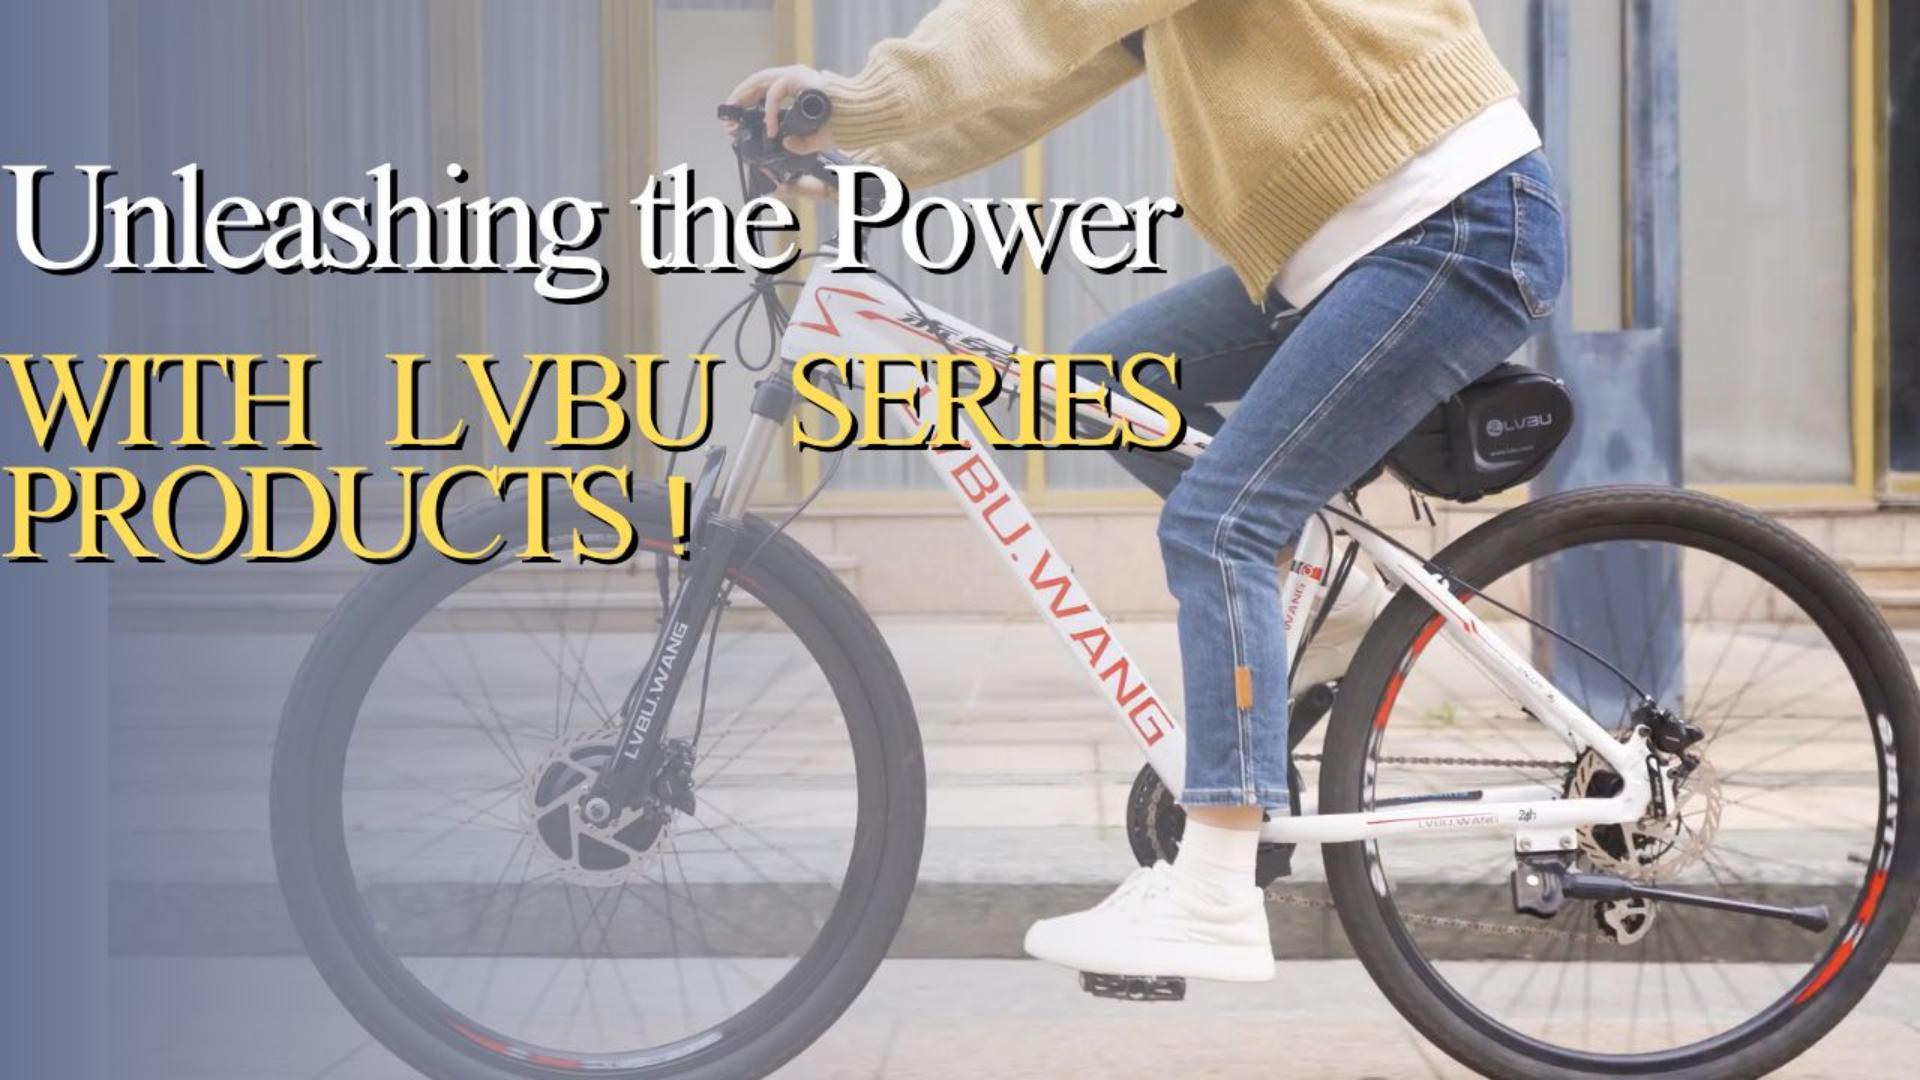 Unleashing the Power with Lvbu Series products !